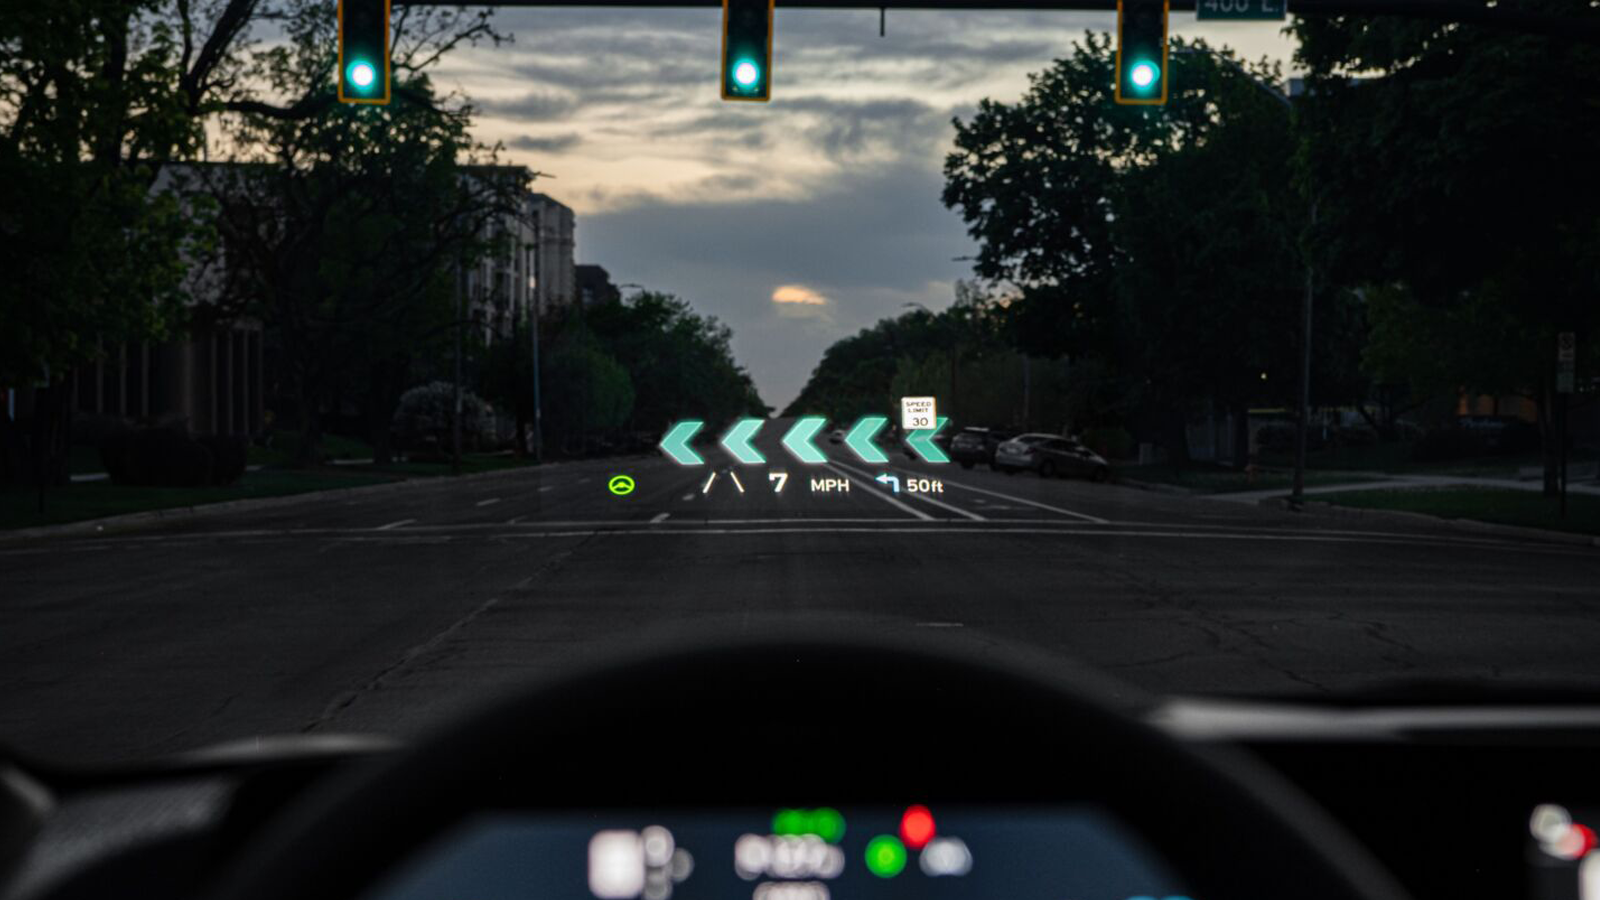 The Kia EV6's augmented reality heads up display in action